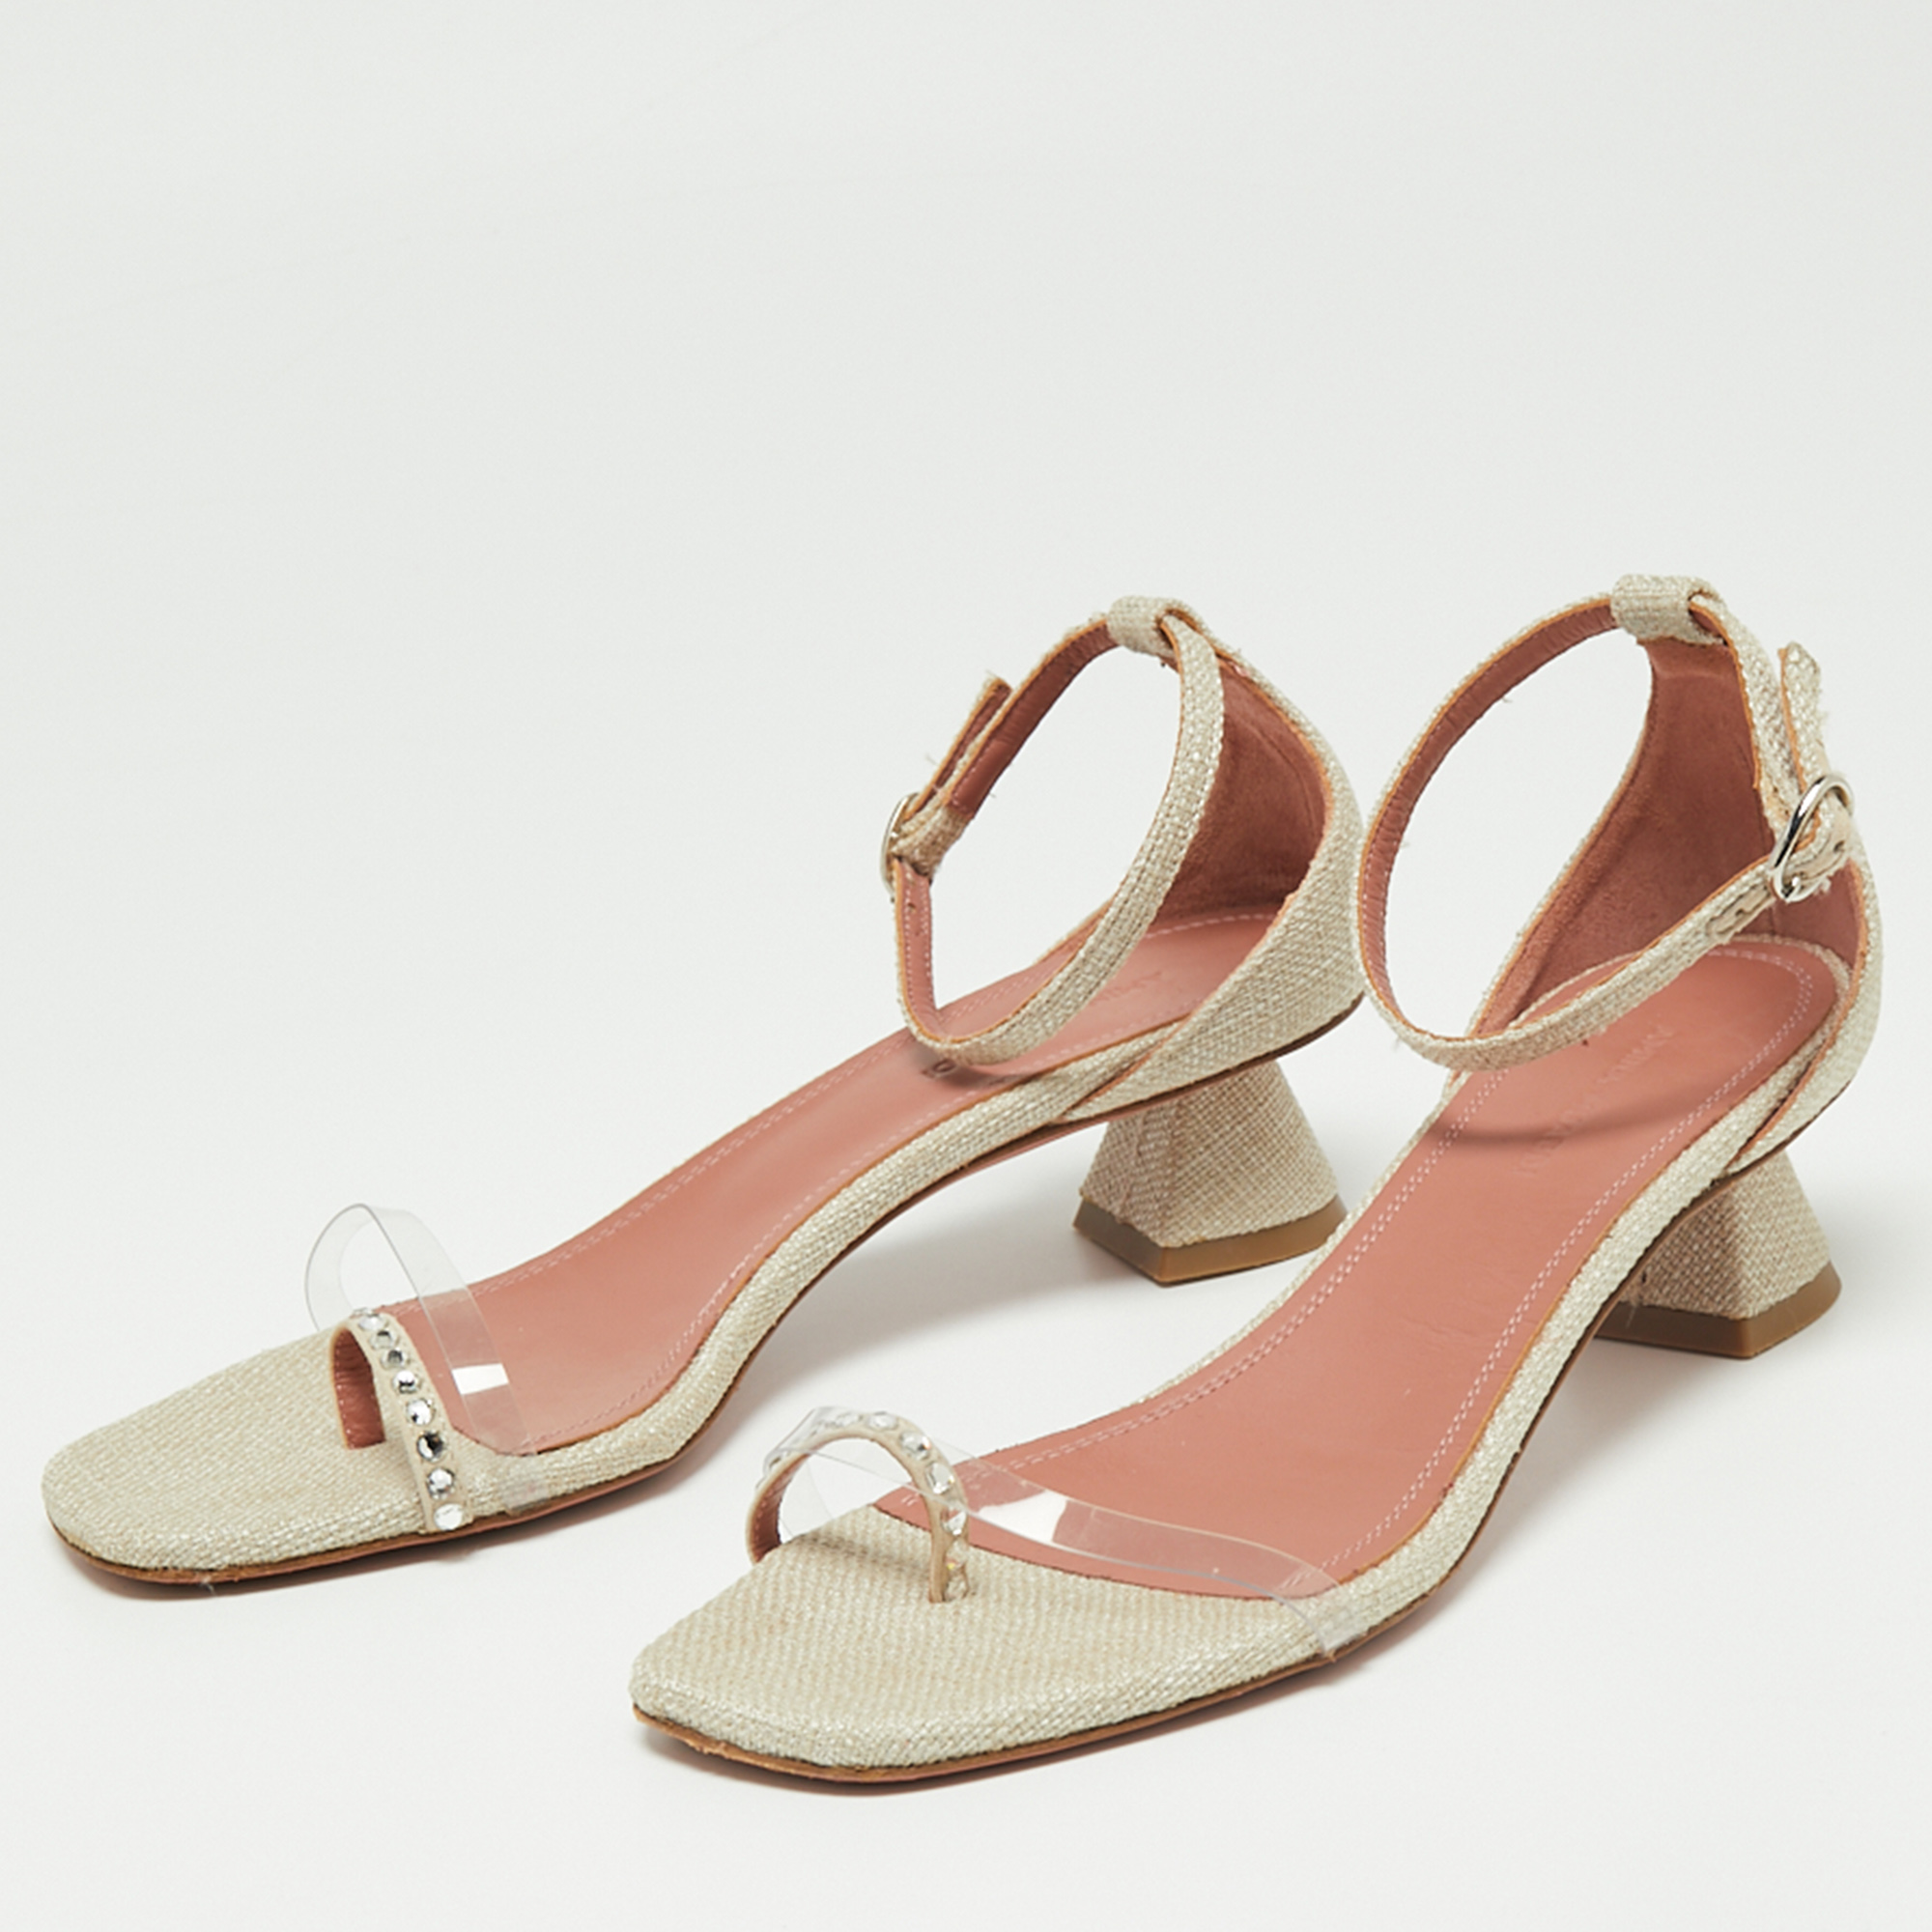 Amina Muaddi Beige Canvas, PVC and Crystal Embellished Suede Oya Ankle Strap Sandals Size 37  - buy with discount